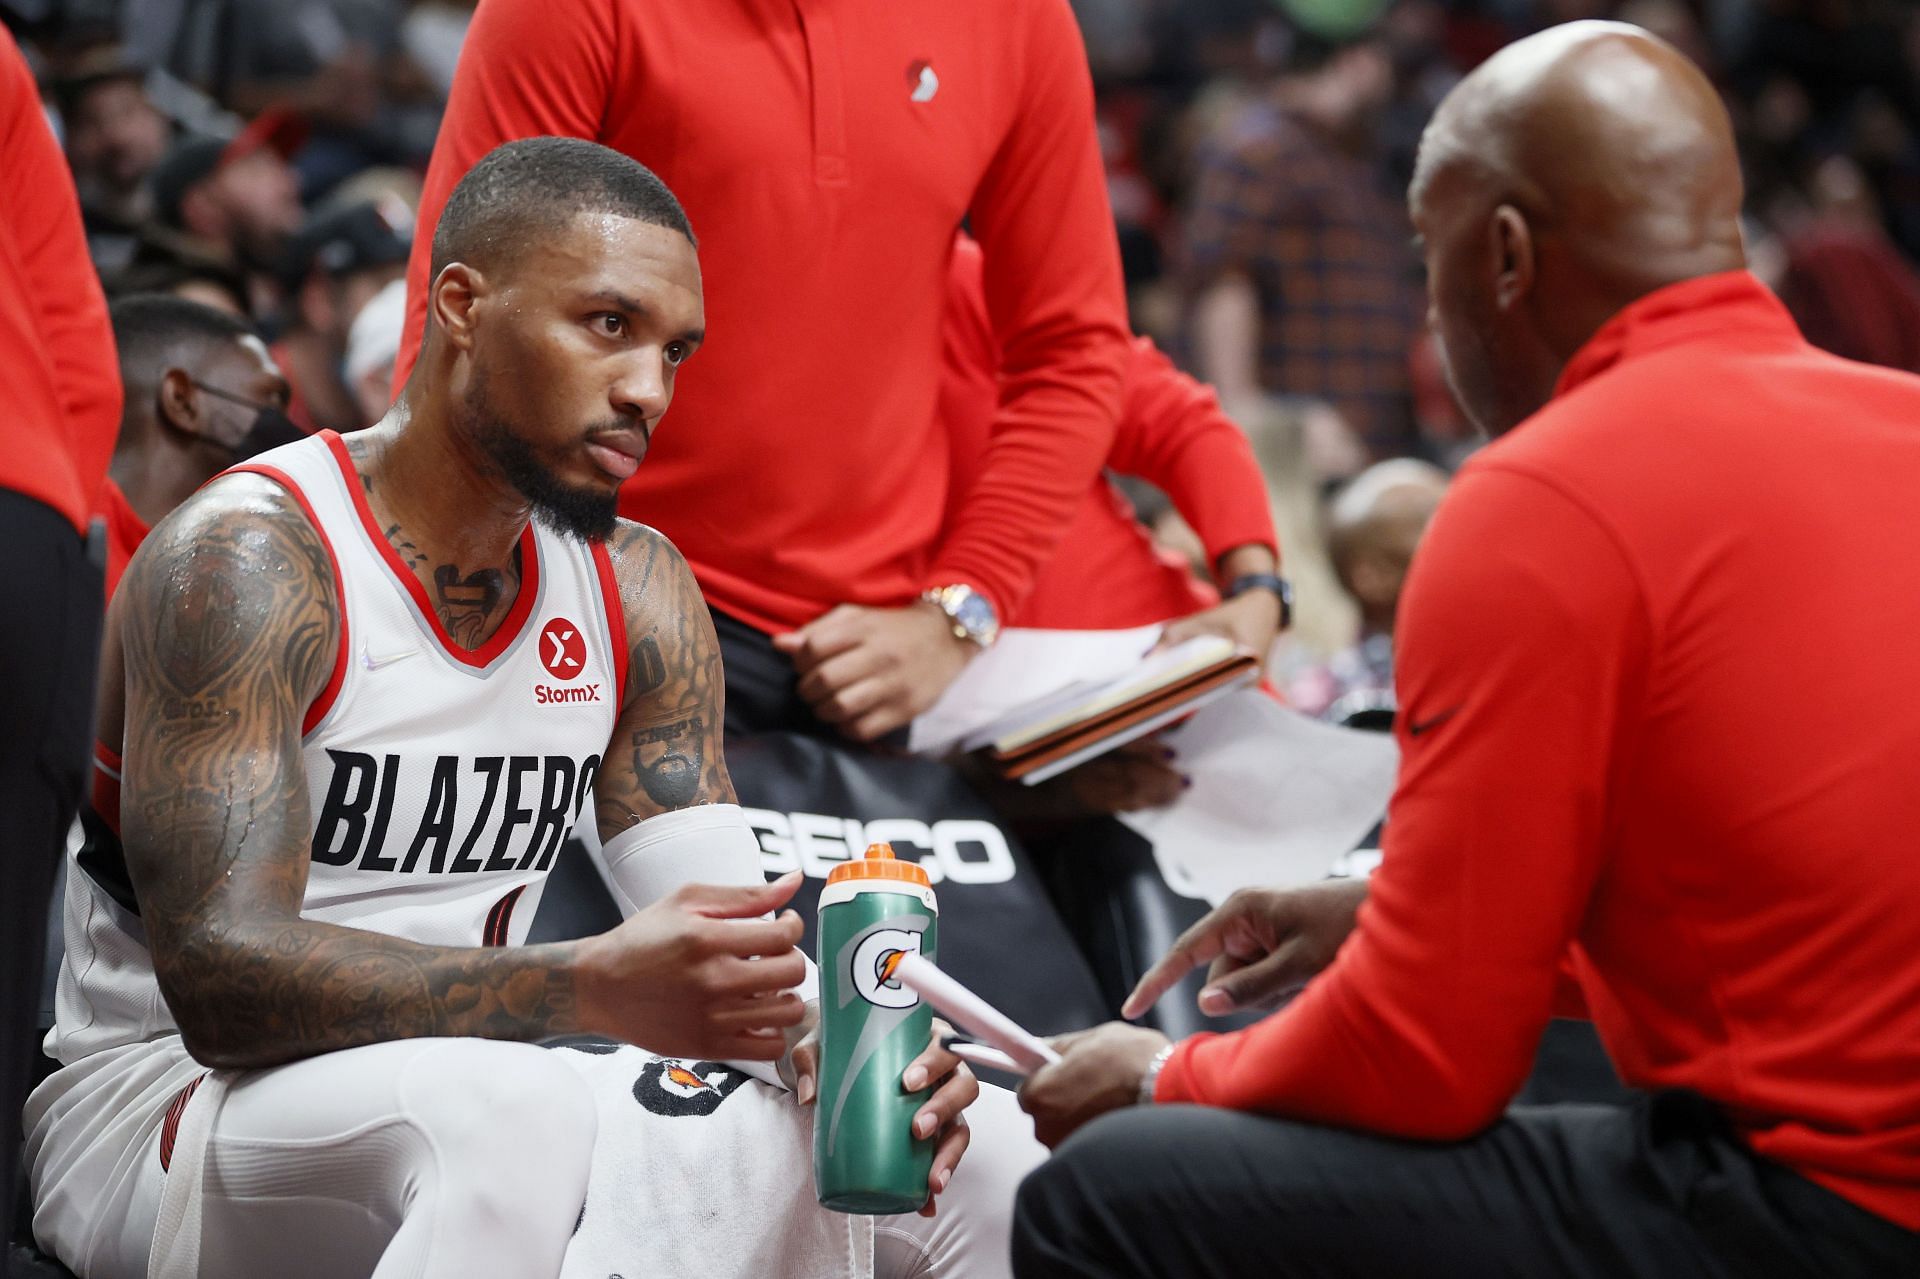 Damian Lillard is committed to the Portland Trail Blazers because of coach Chauncey Billups